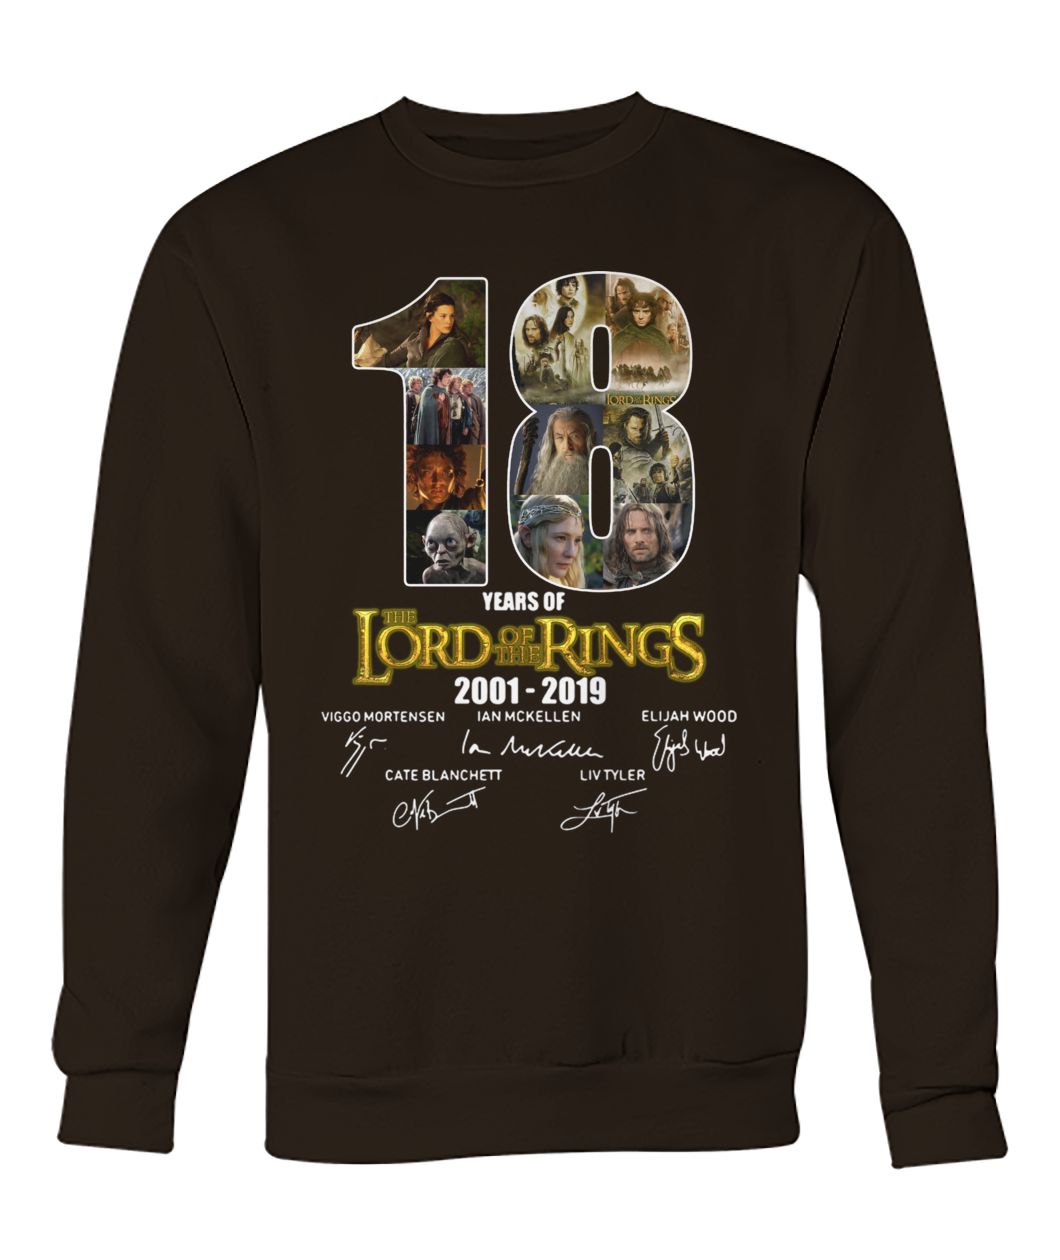 18 years of the lord of the rings 2001 2019 signatures crew neck sweatshirt